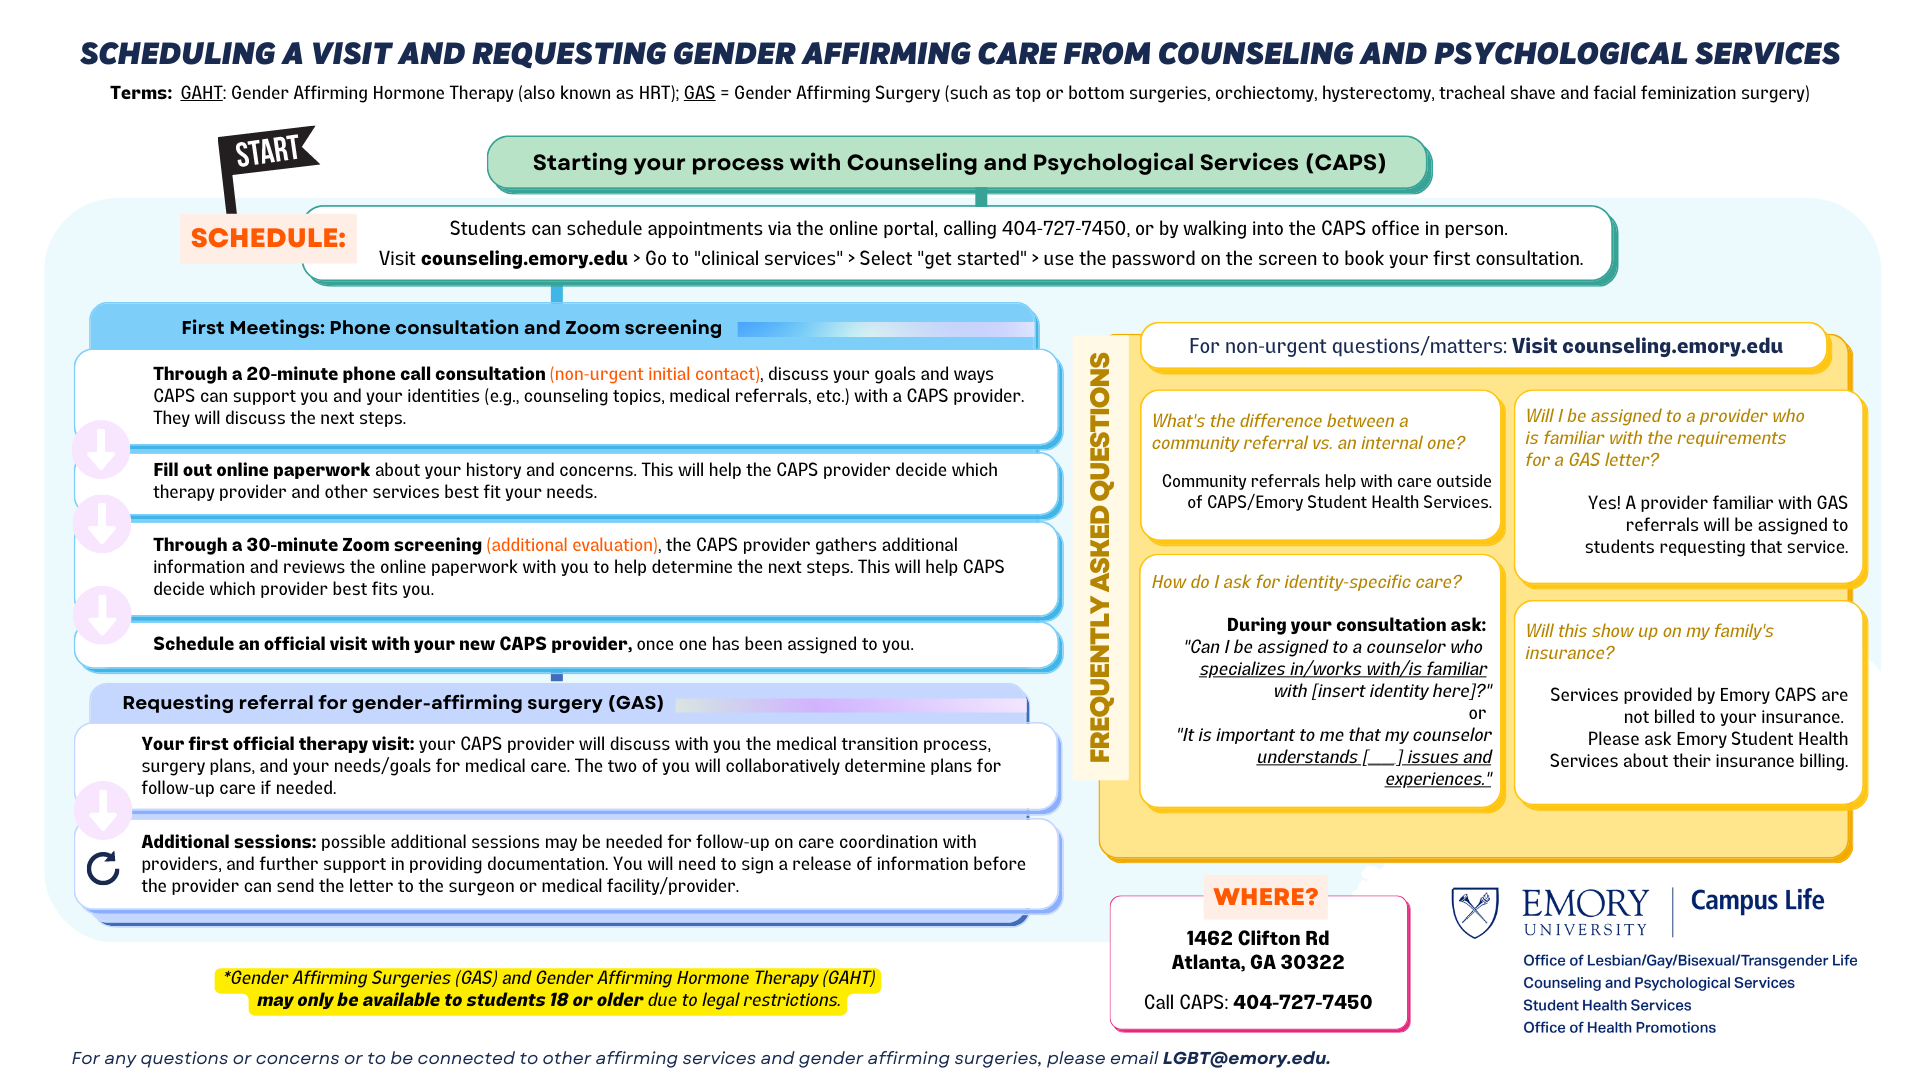 infographic outlining gender affirming care at counseling services